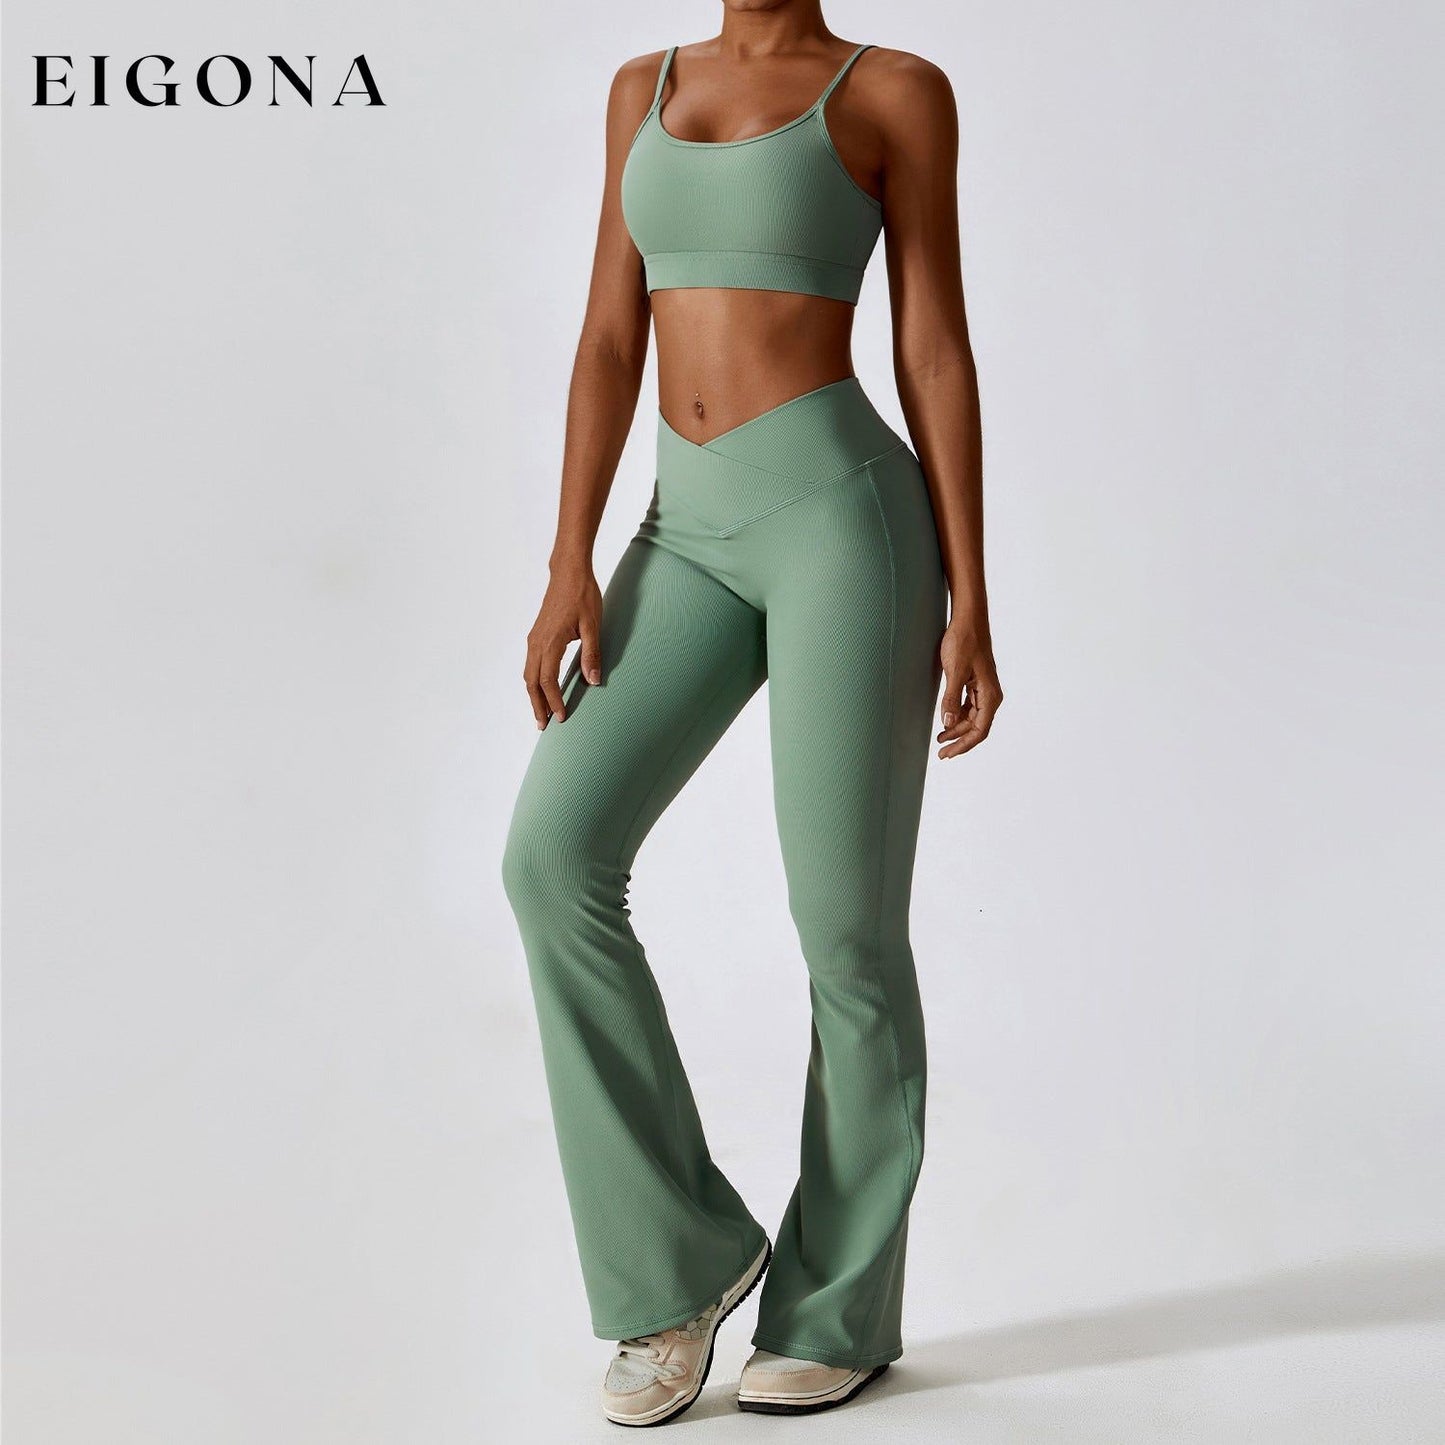 Thread Abdominal Shaping High Waist Beauty Back Yoga Suit Quick Drying Push up Hip Raise Skinny Workout Exercise Outfit -1 Bra Bell-Bottom Pants Basil Green 2 piece activewear clothes set workout